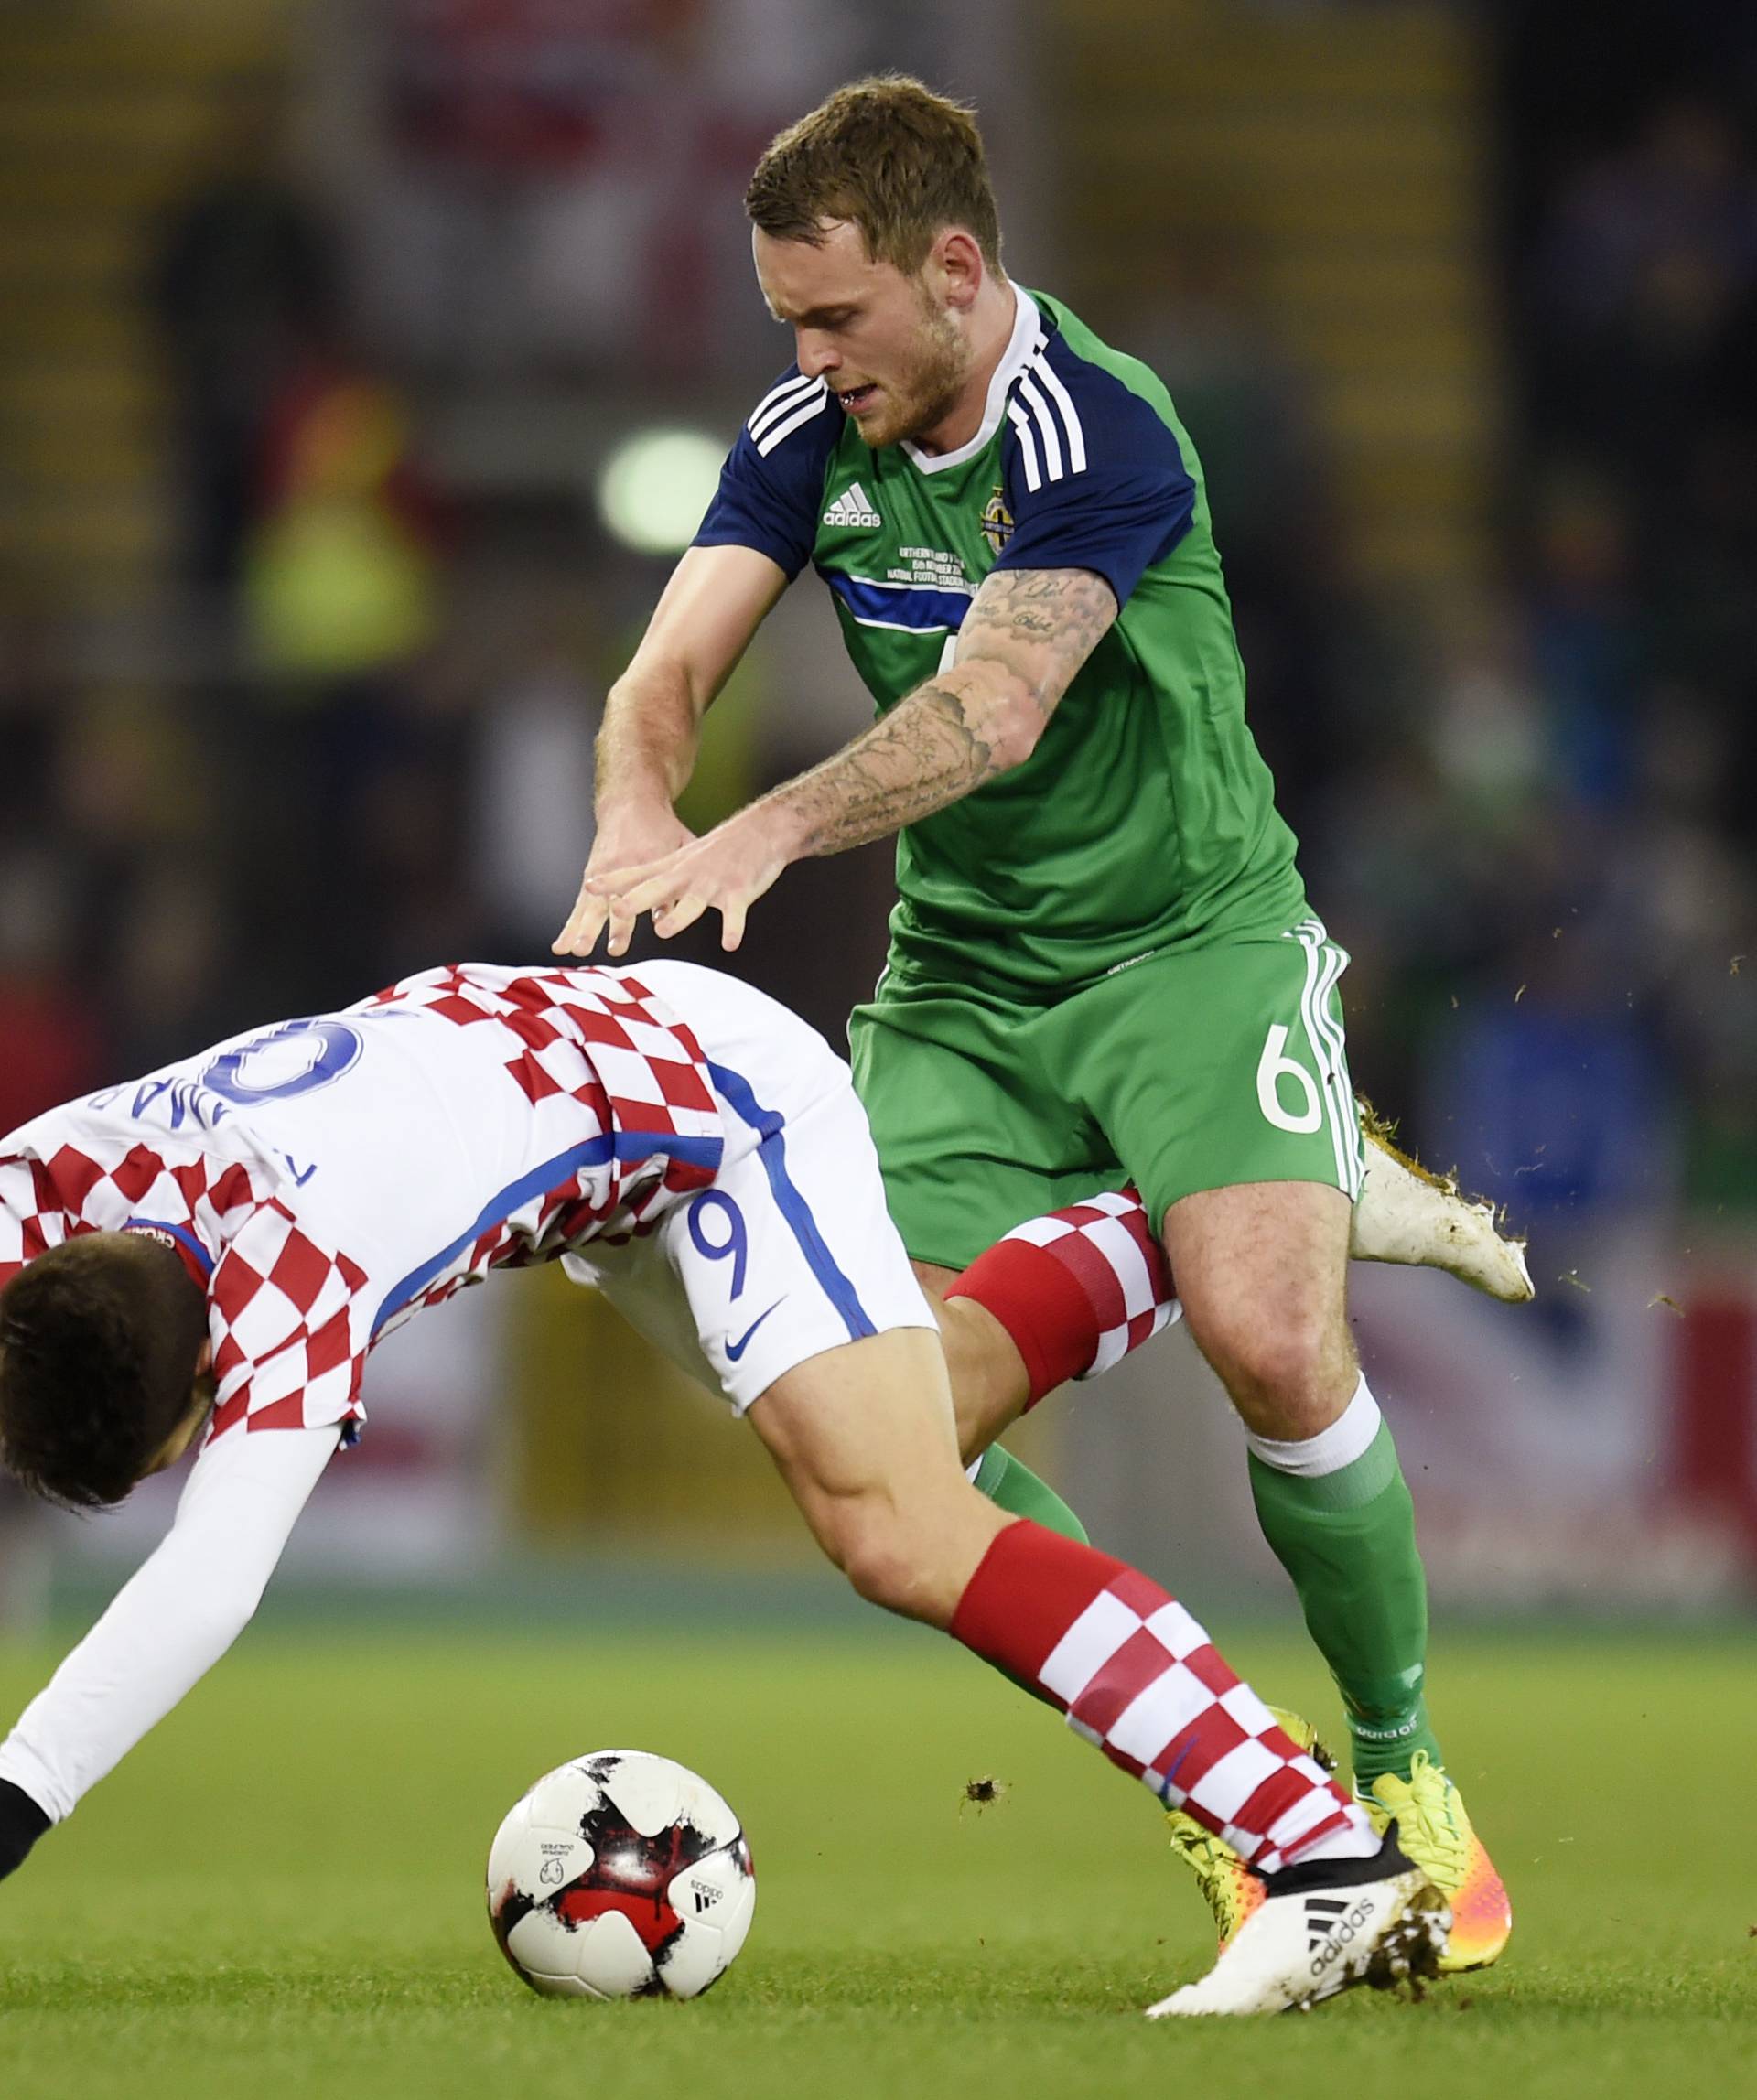 Northern Ireland's Lee Hodson in action with Croatia's Andrej Kramaric